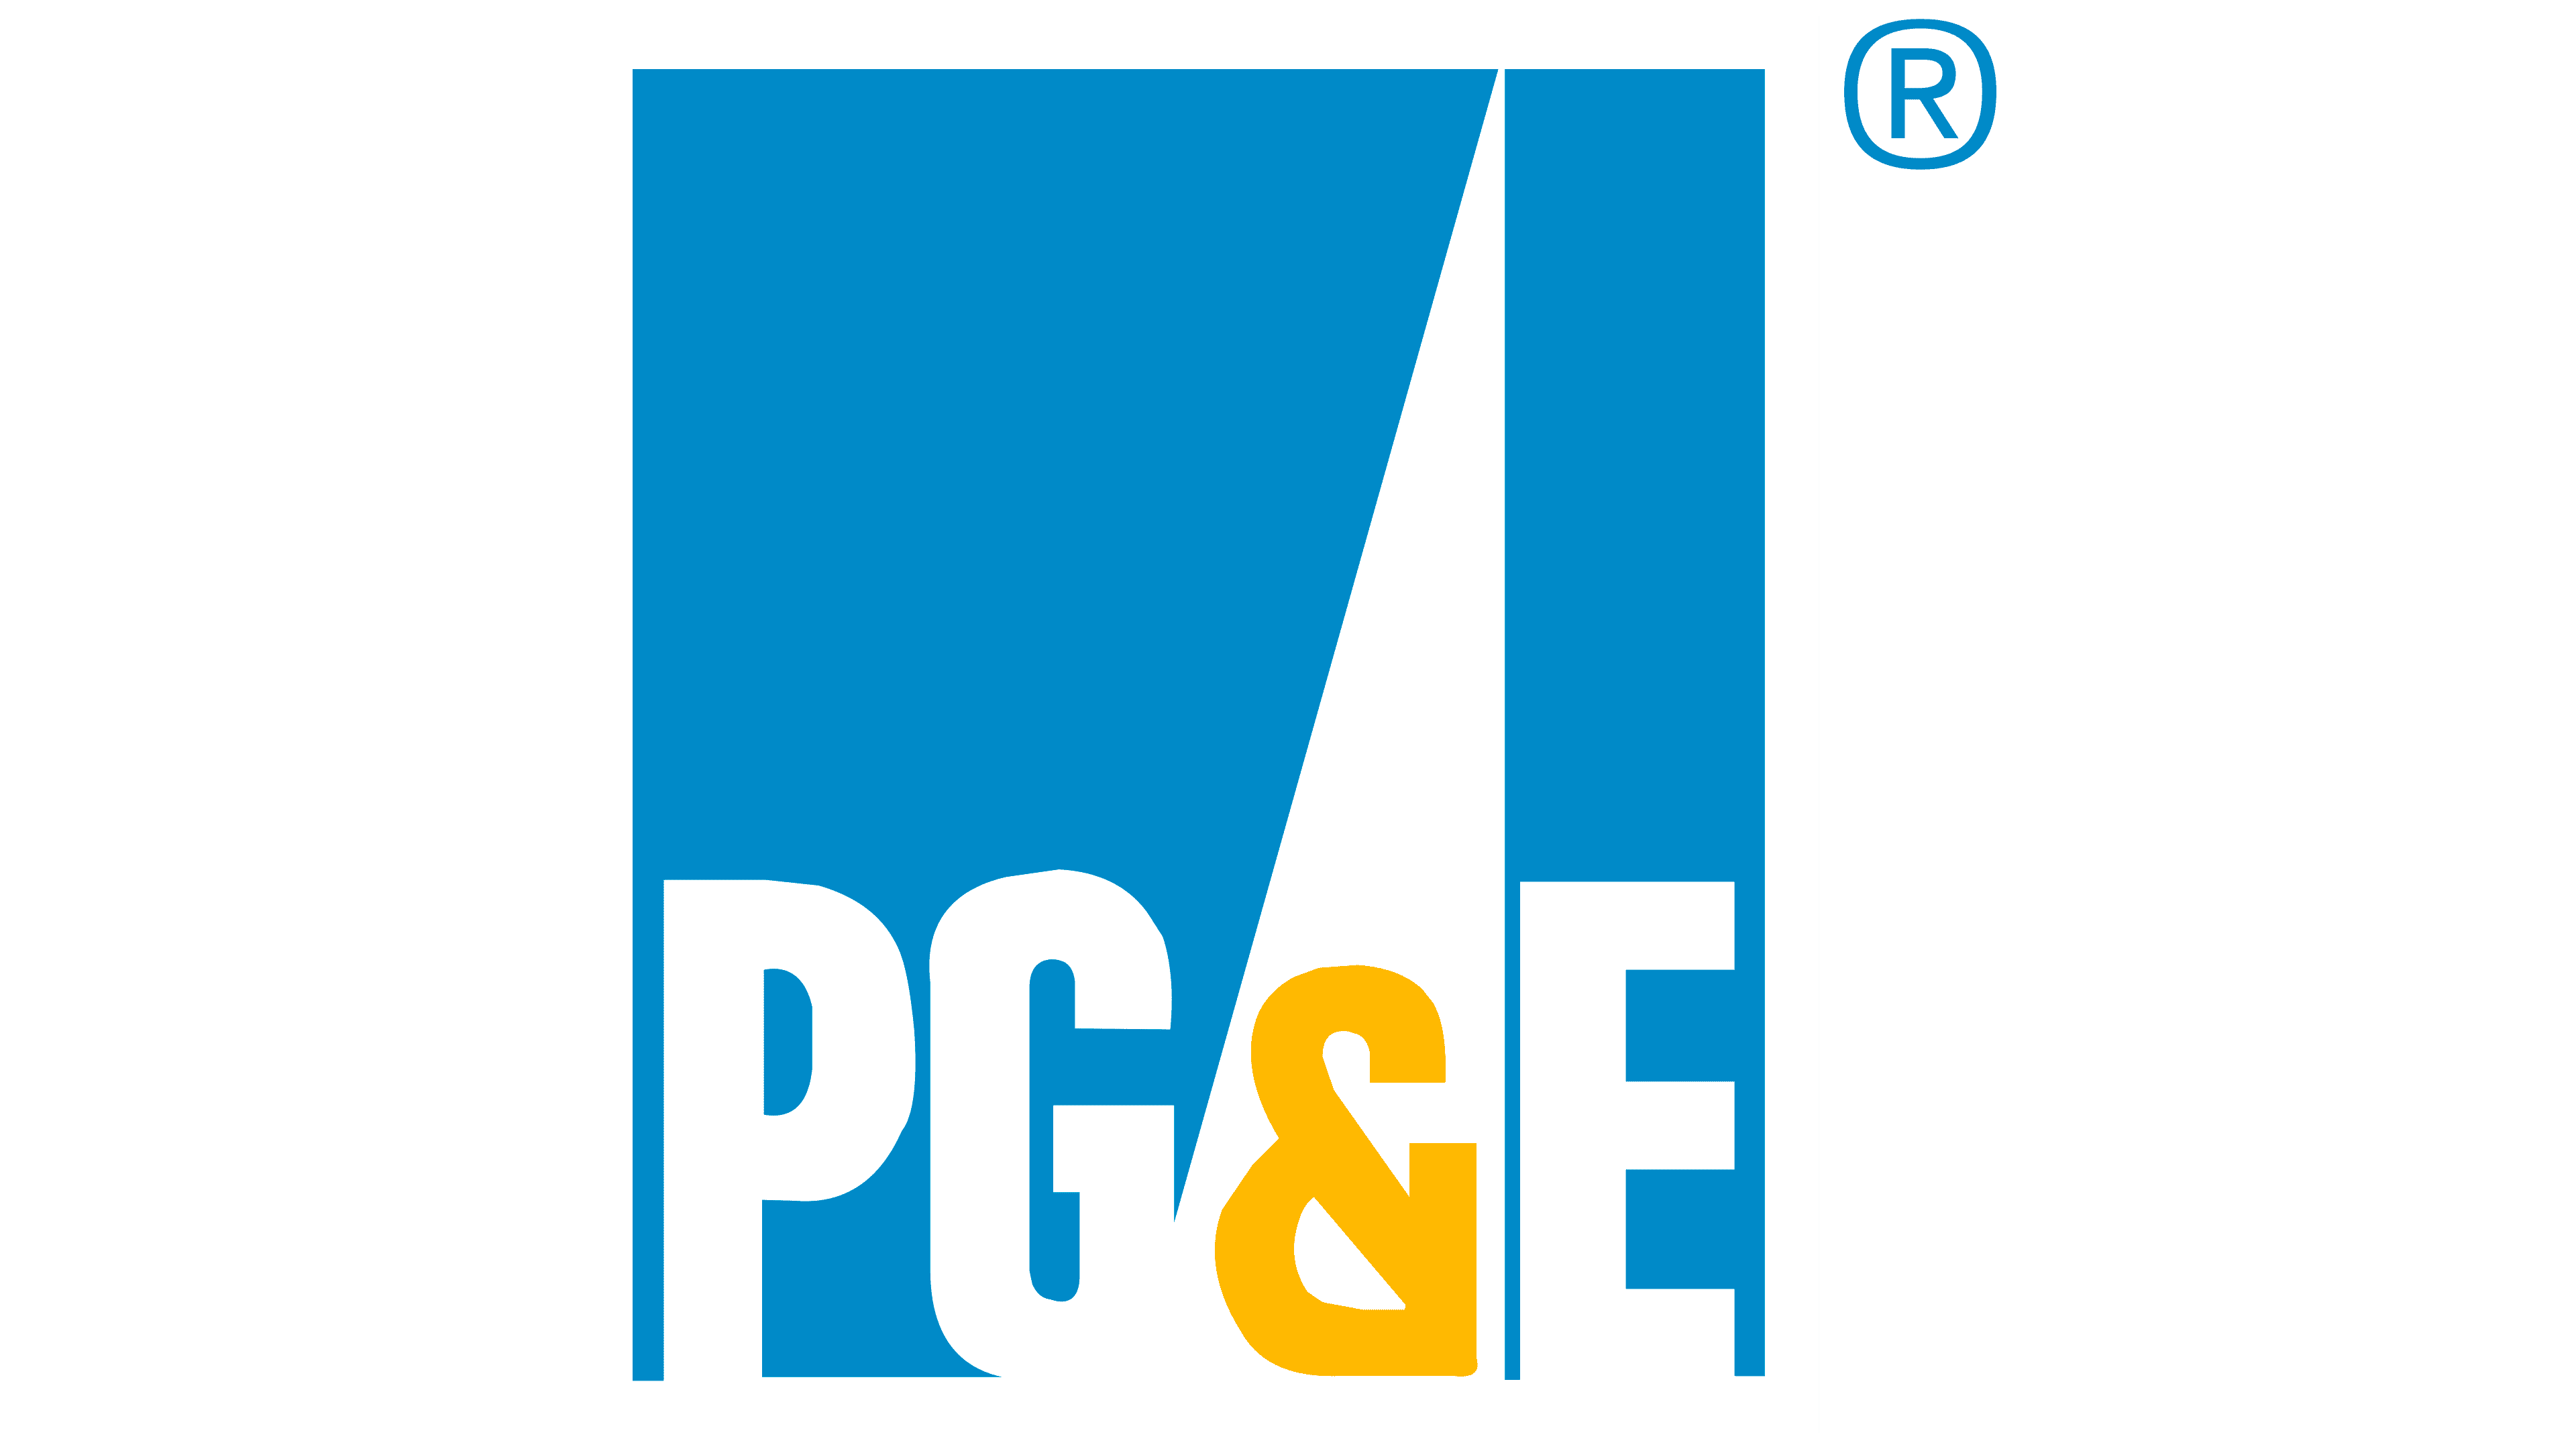 PG&E Logo, symbol, meaning, history, PNG, brand